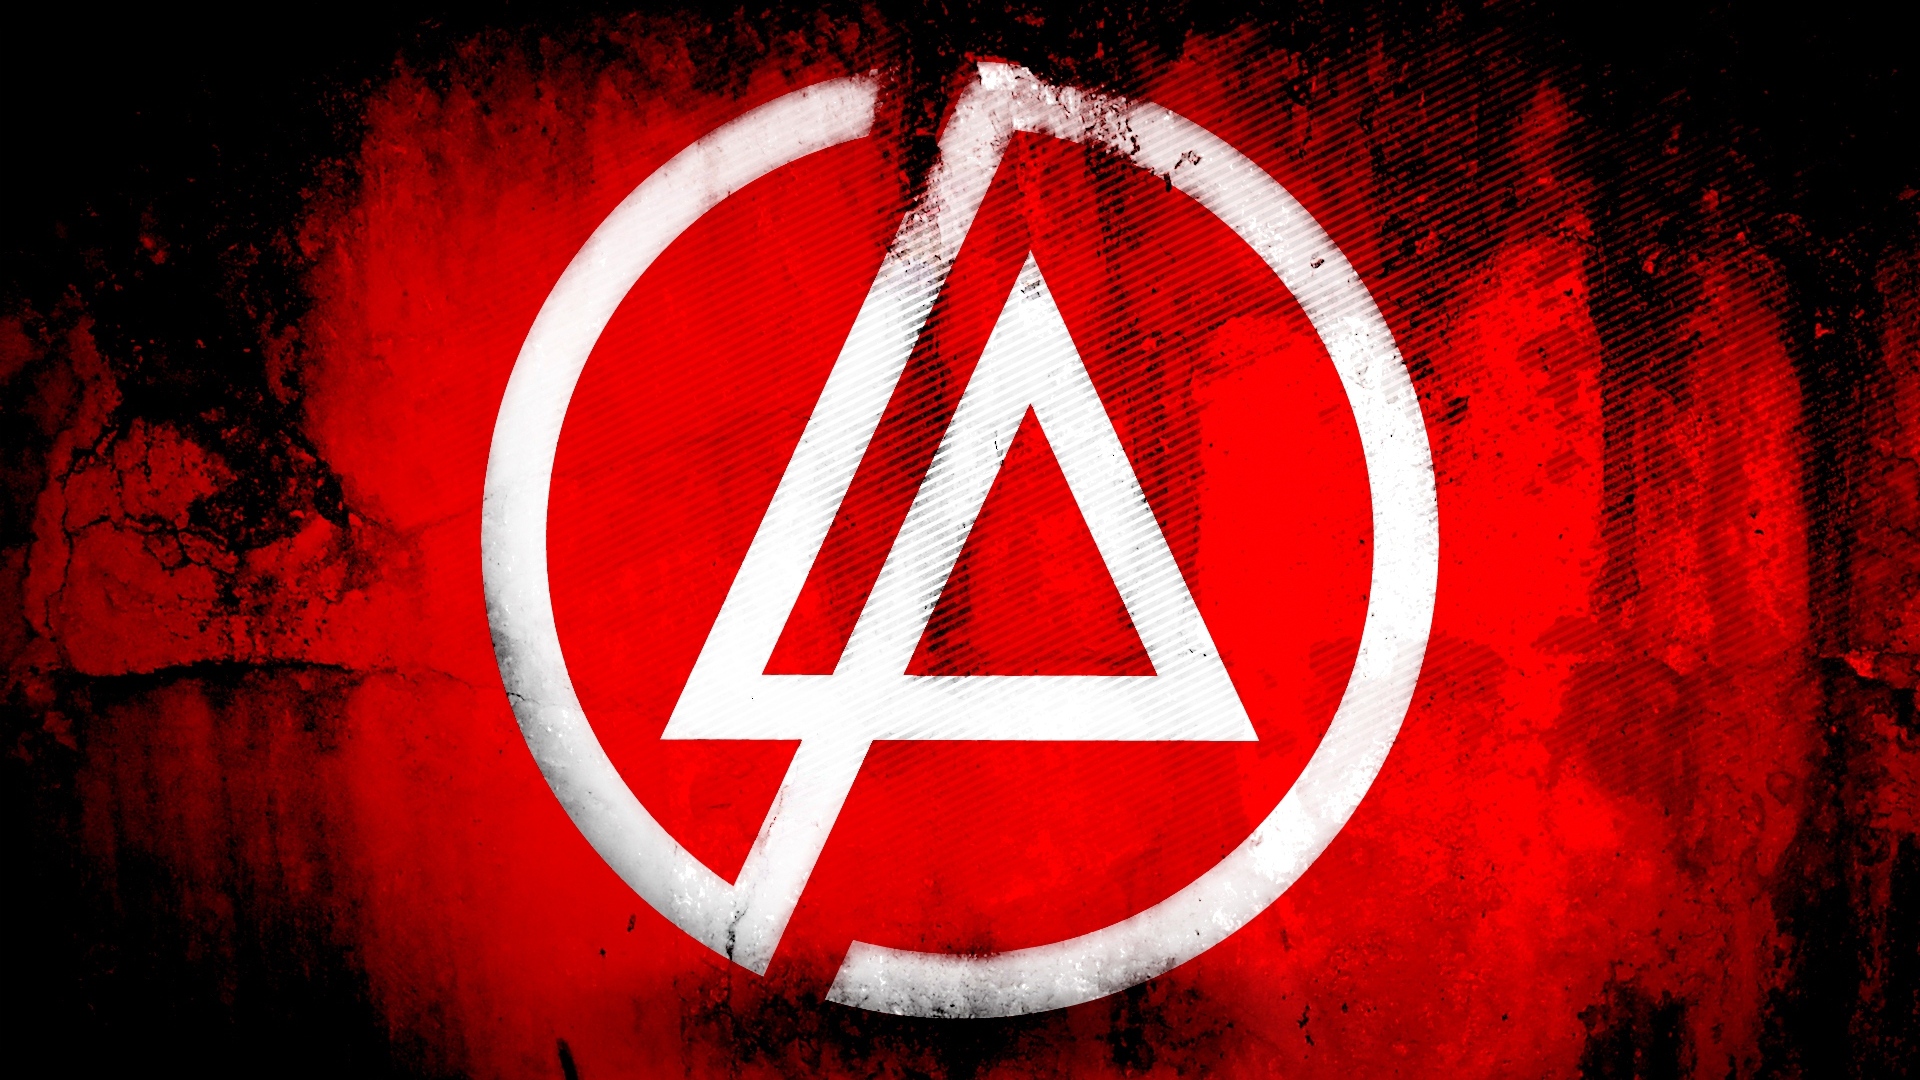 Free Download Linkin Park Wallpapers High Resolution And Quality Download 1920x1080 For Your Desktop Mobile Tablet Explore 76 Linkin Park Backgrounds Linkin Park Wallpaper 1080p Hd Linkin Park Logo Wallpaper